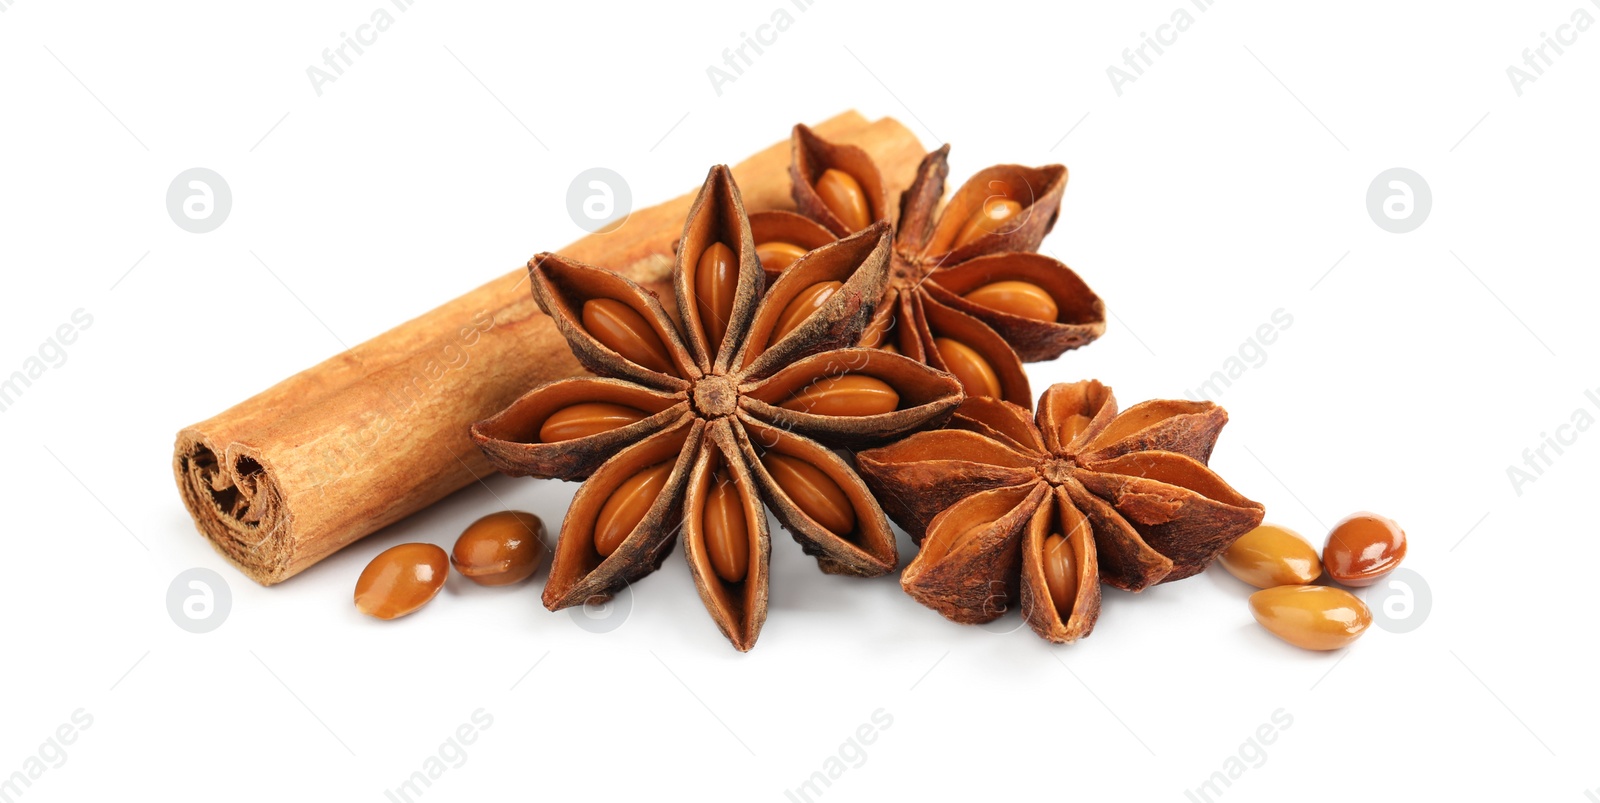 Photo of Dry anise stars and cinnamon stick on white background